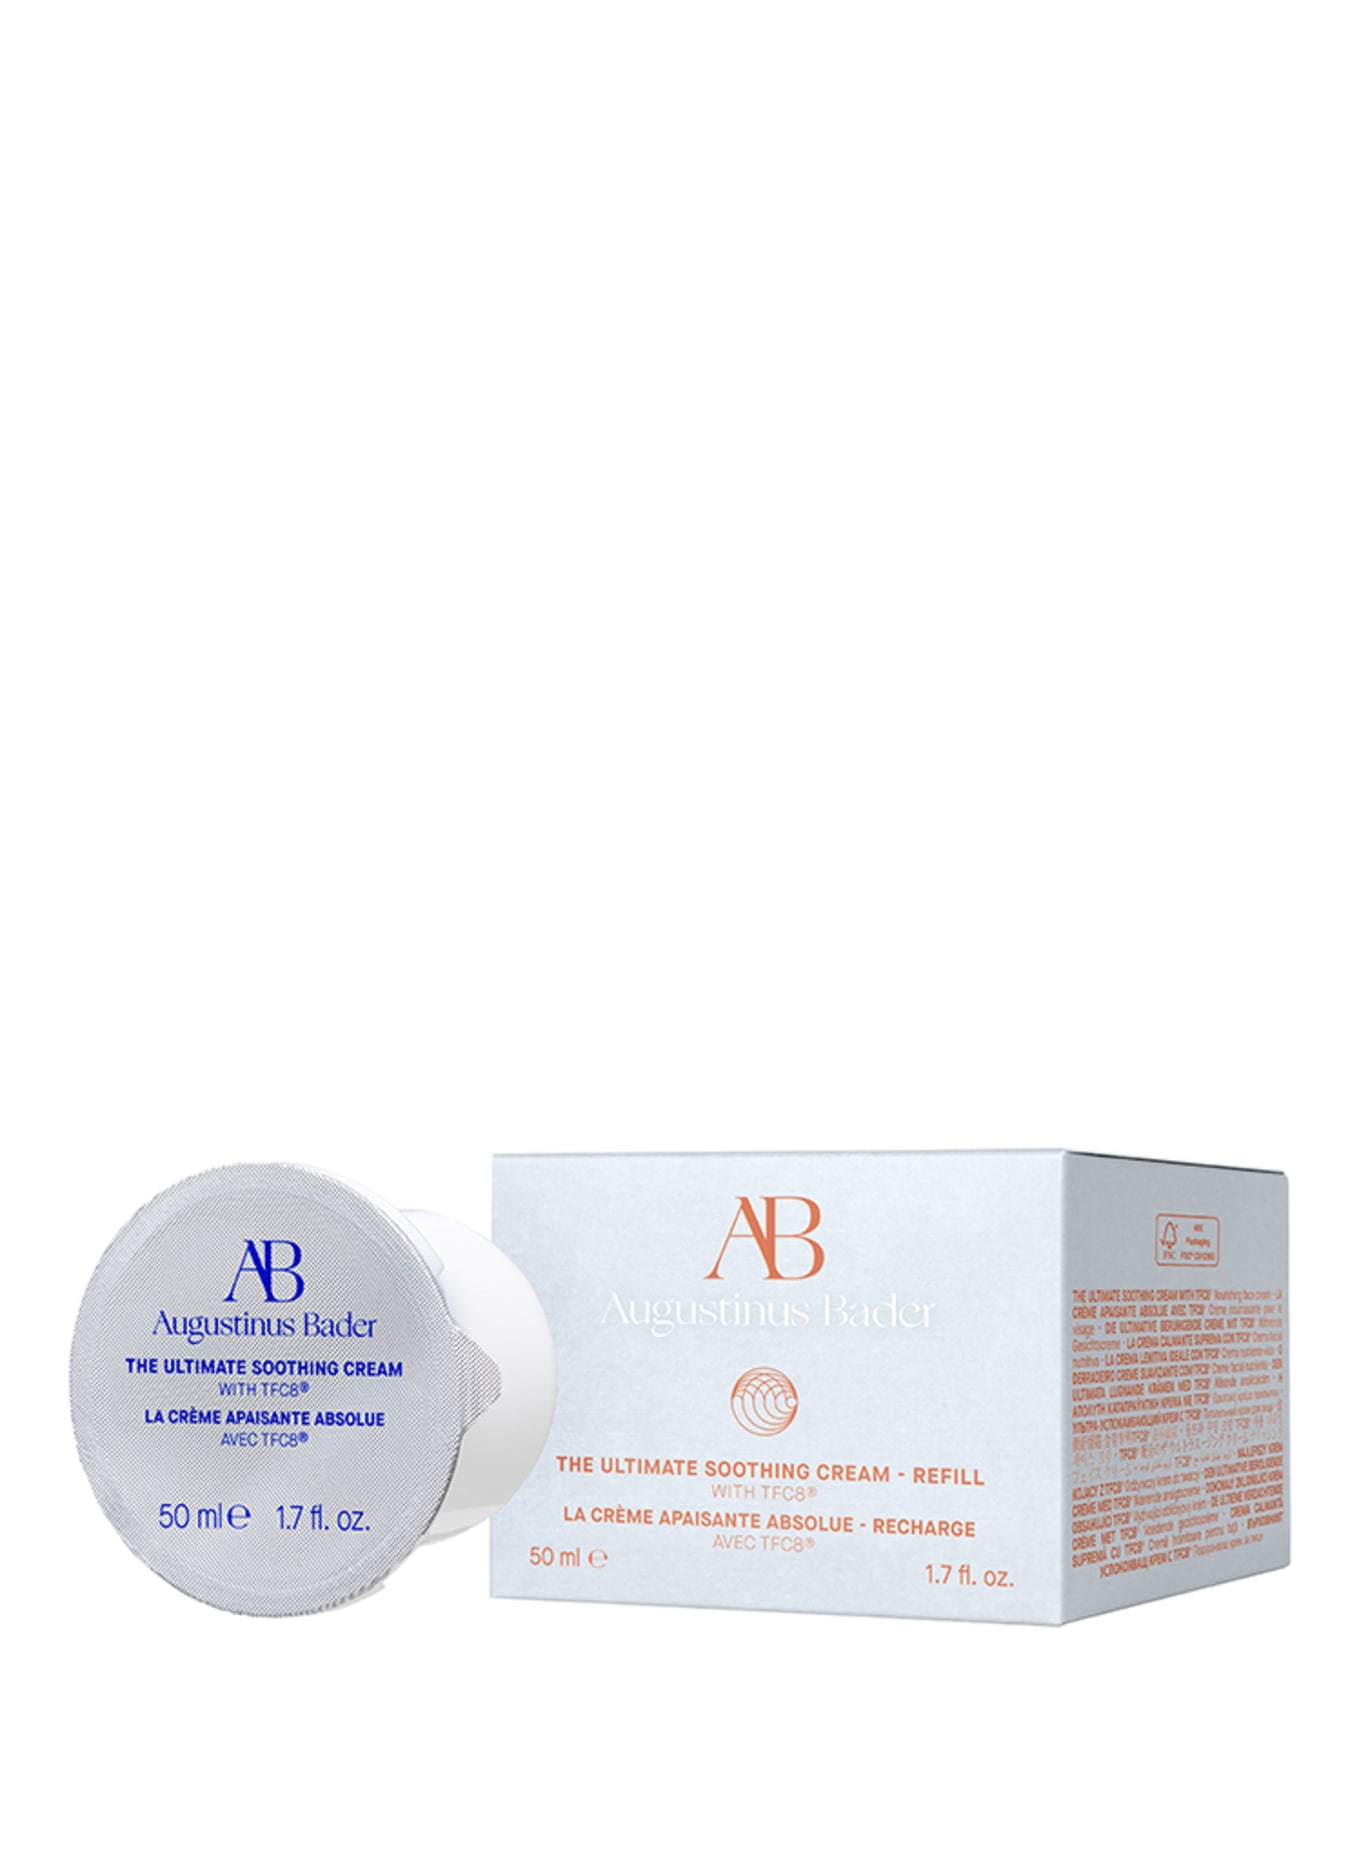 Augustinus Bader THE ULTIMATE SOOTHING CREAM REFILL (Obrázek 2)